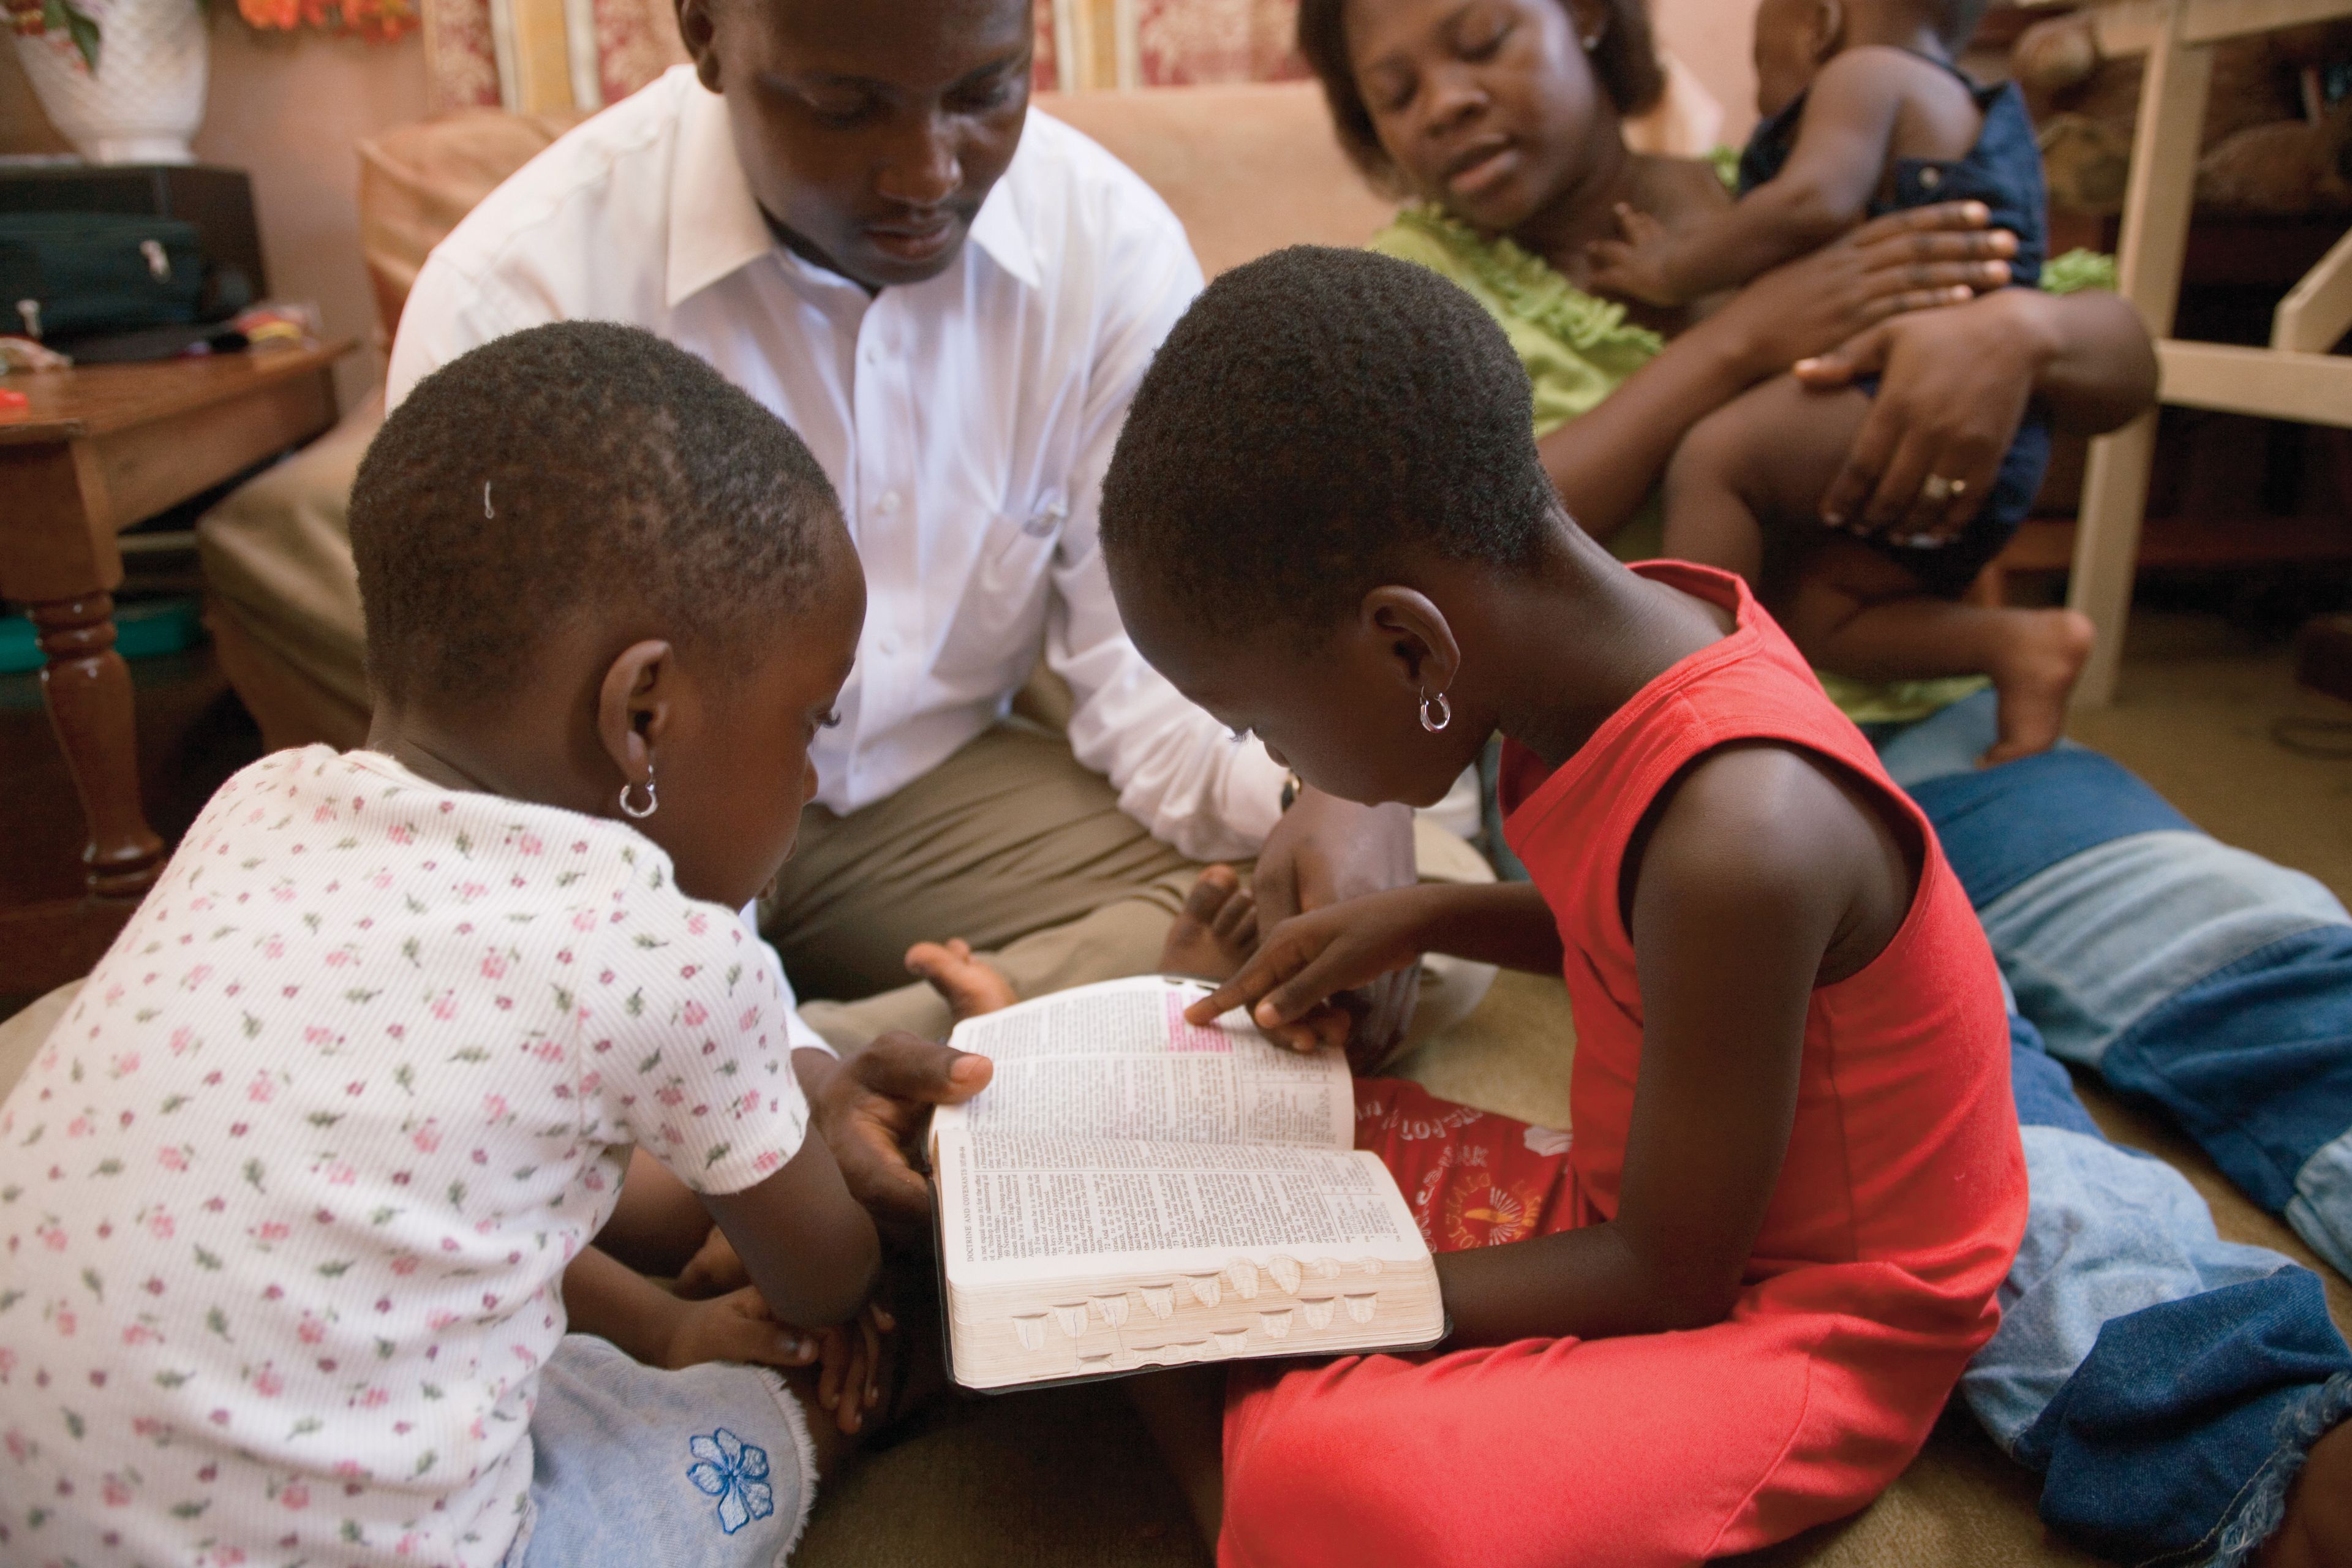 A father helps his two daughters read from the scriptures.